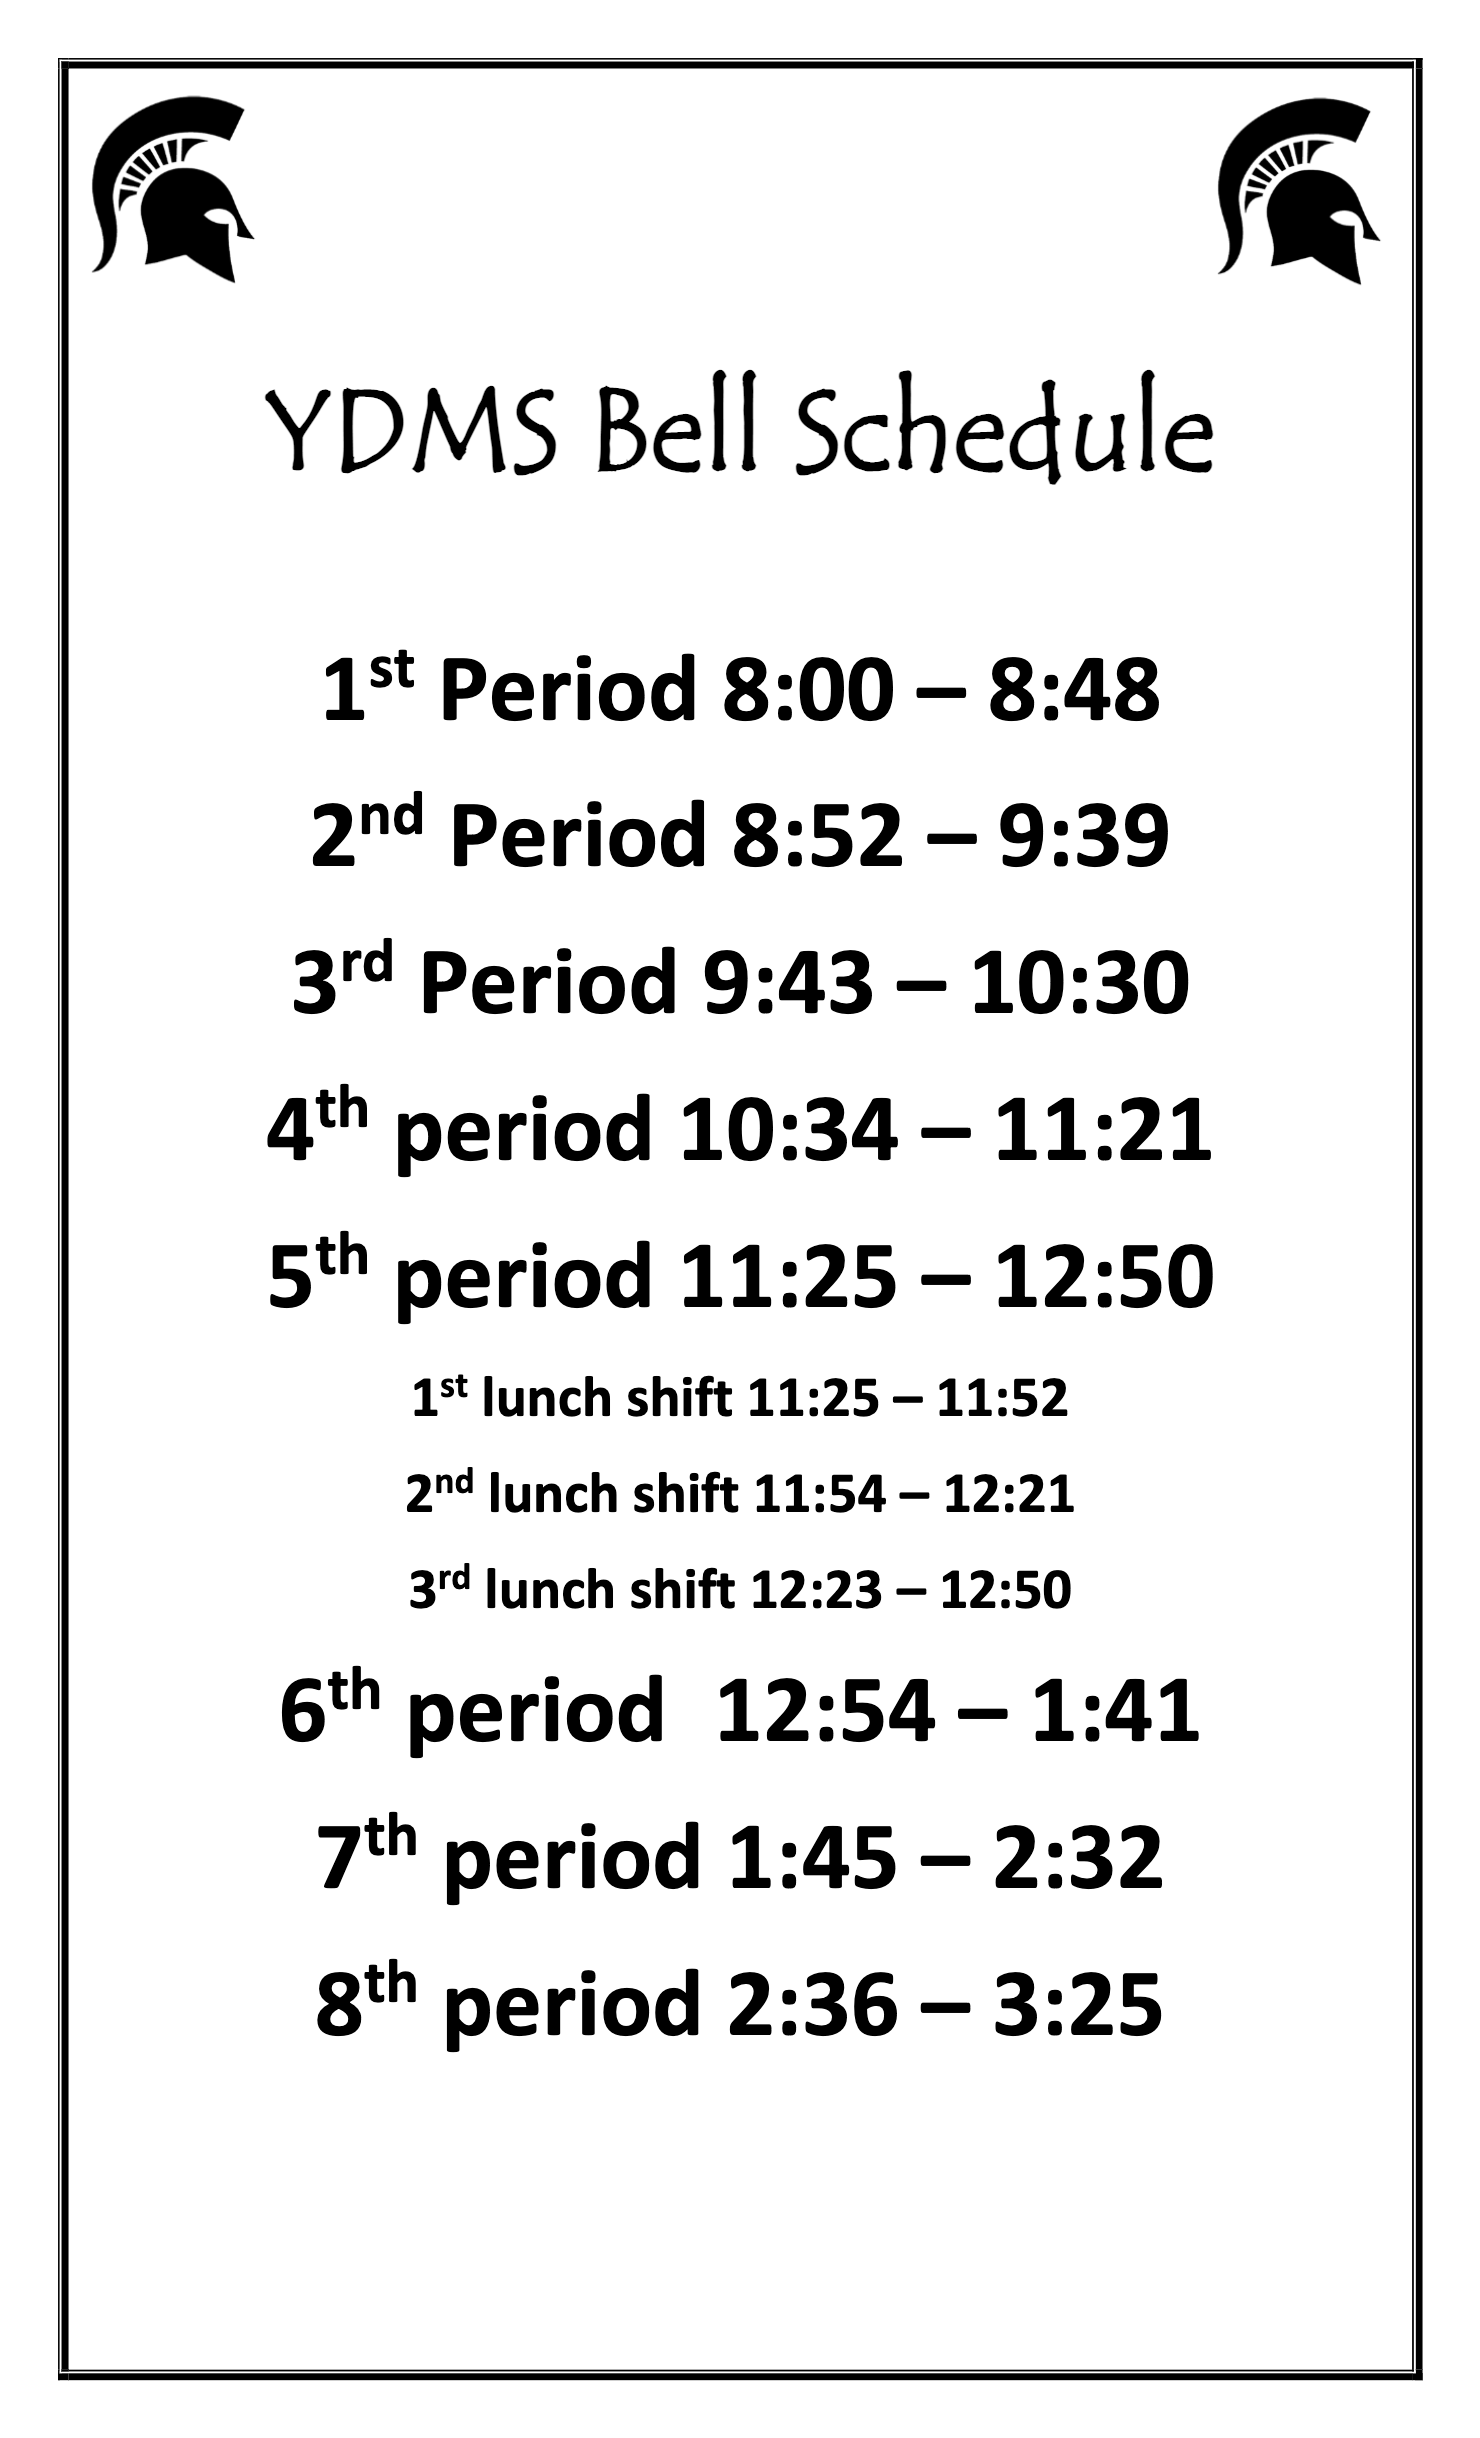 YDMS Bell Schedule